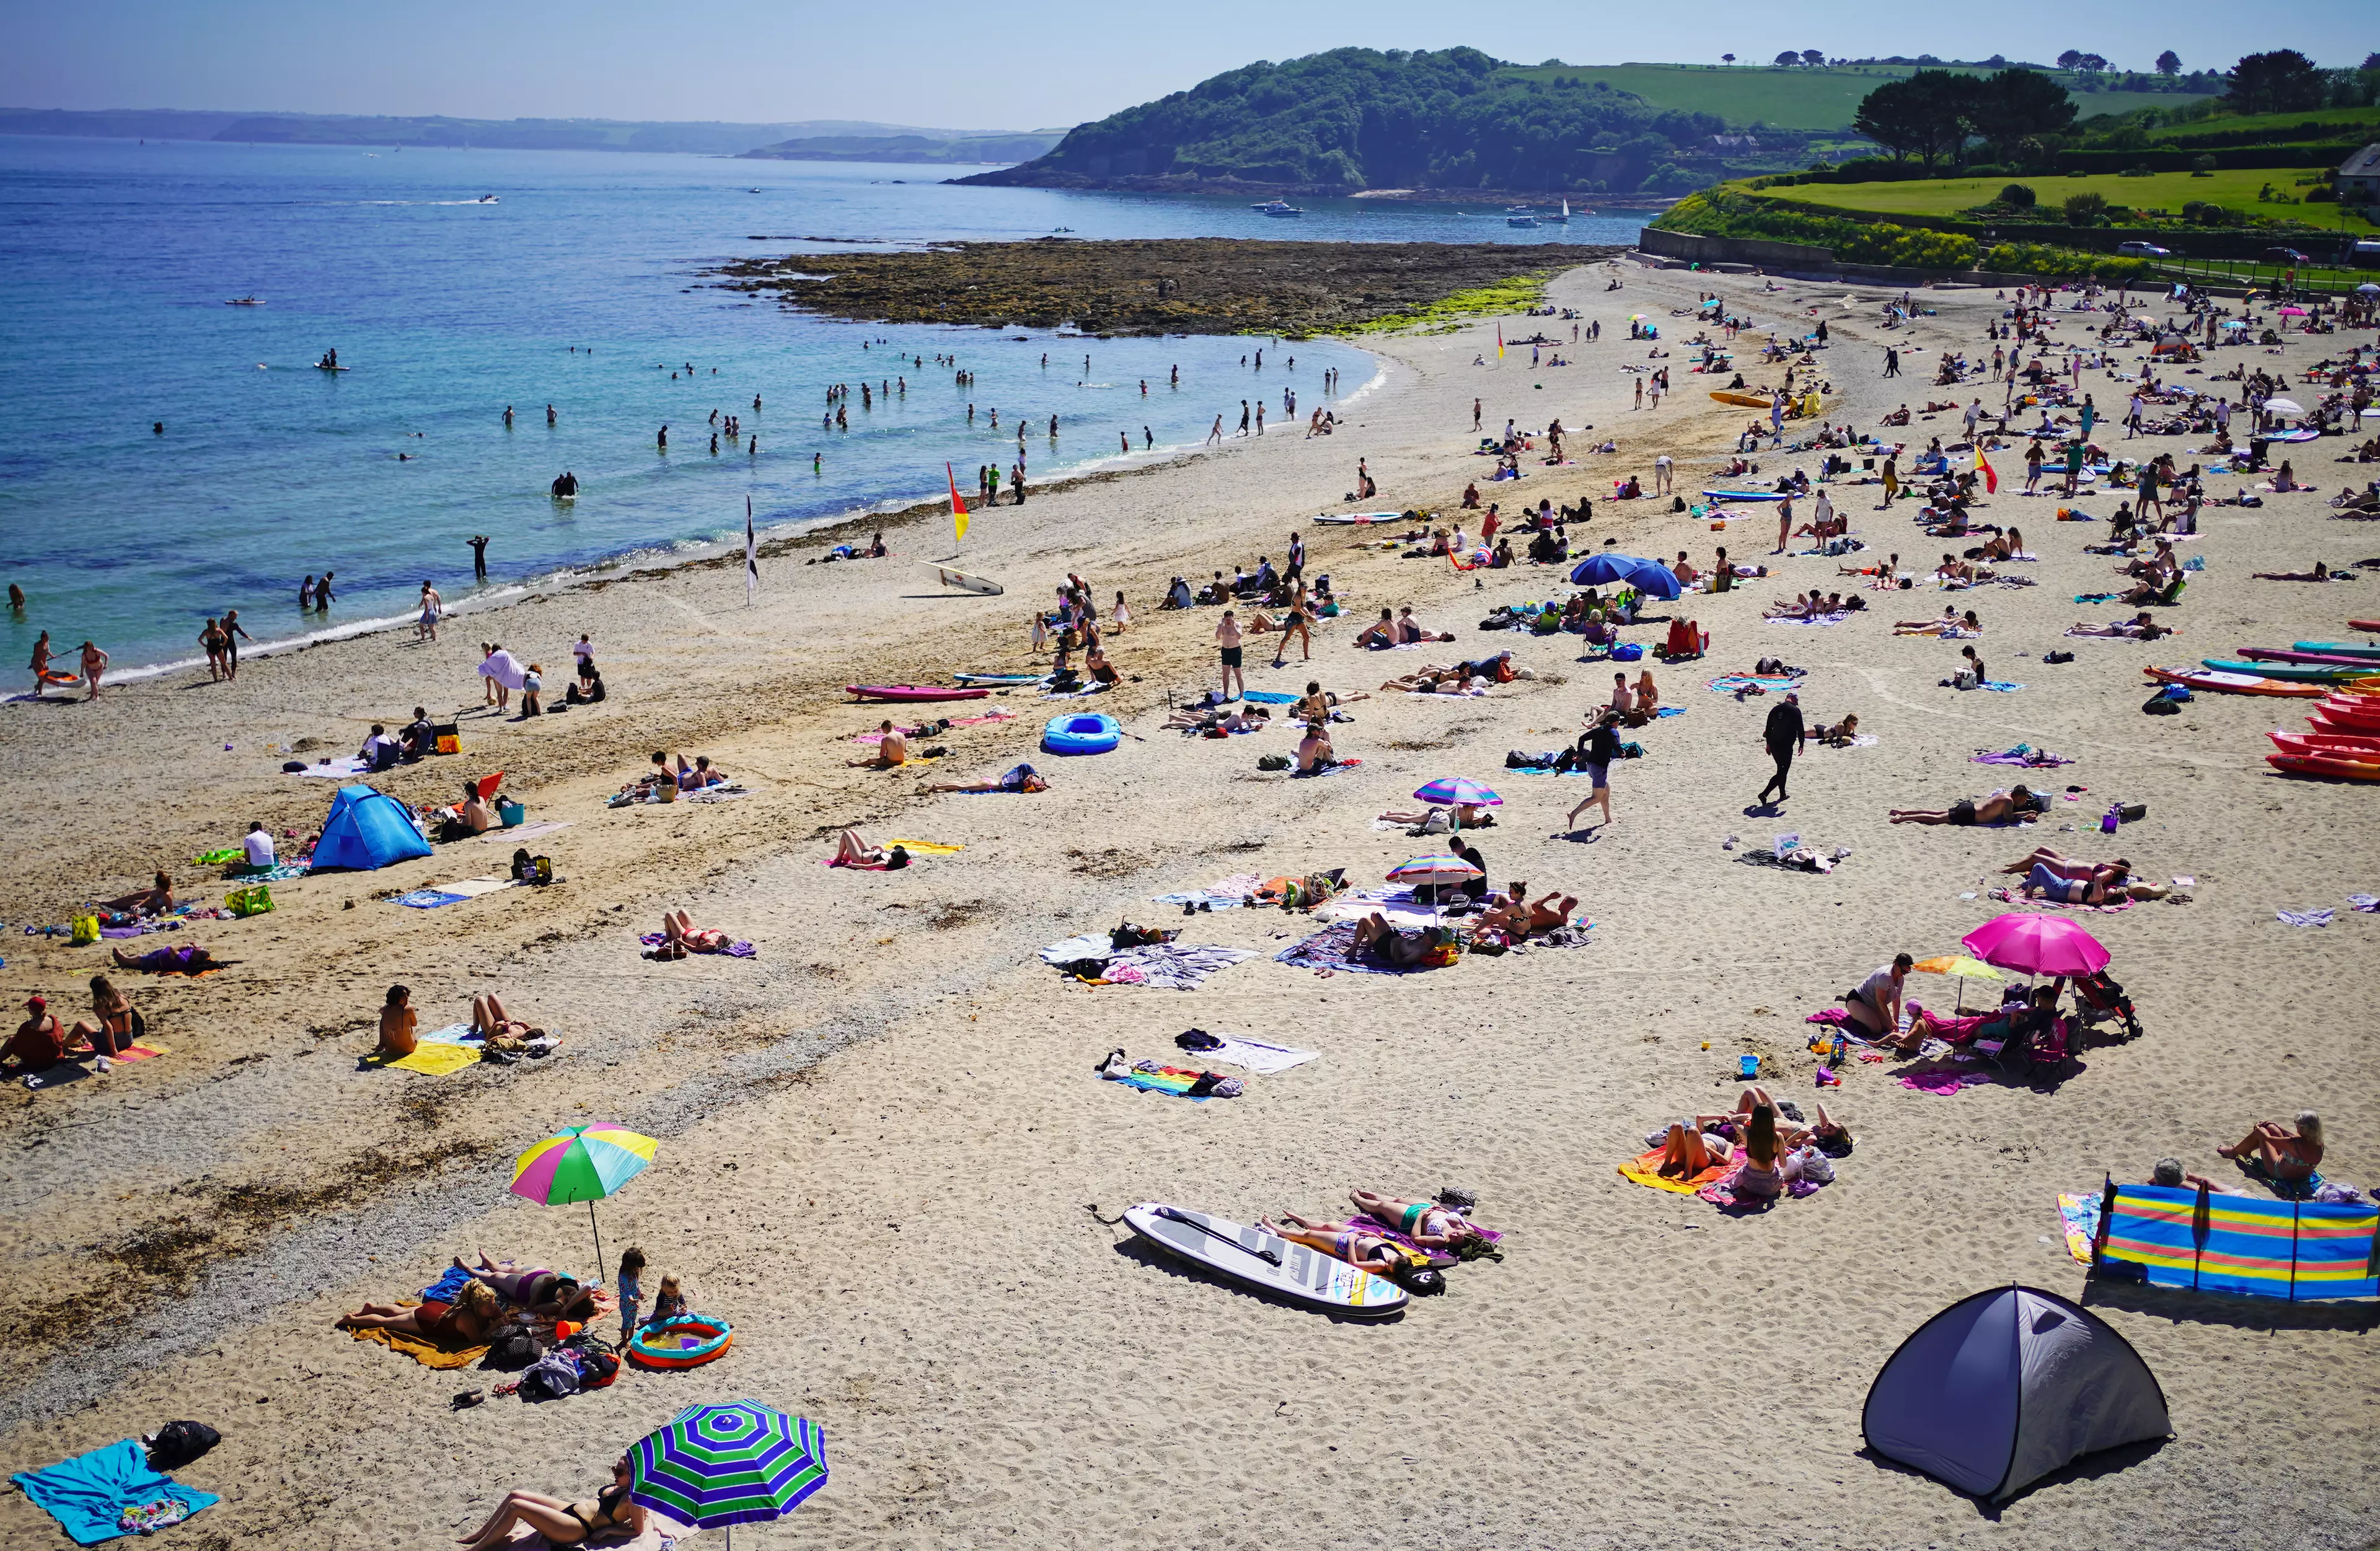 Brits are set to travel to the beach to take advantage of the hot weather (